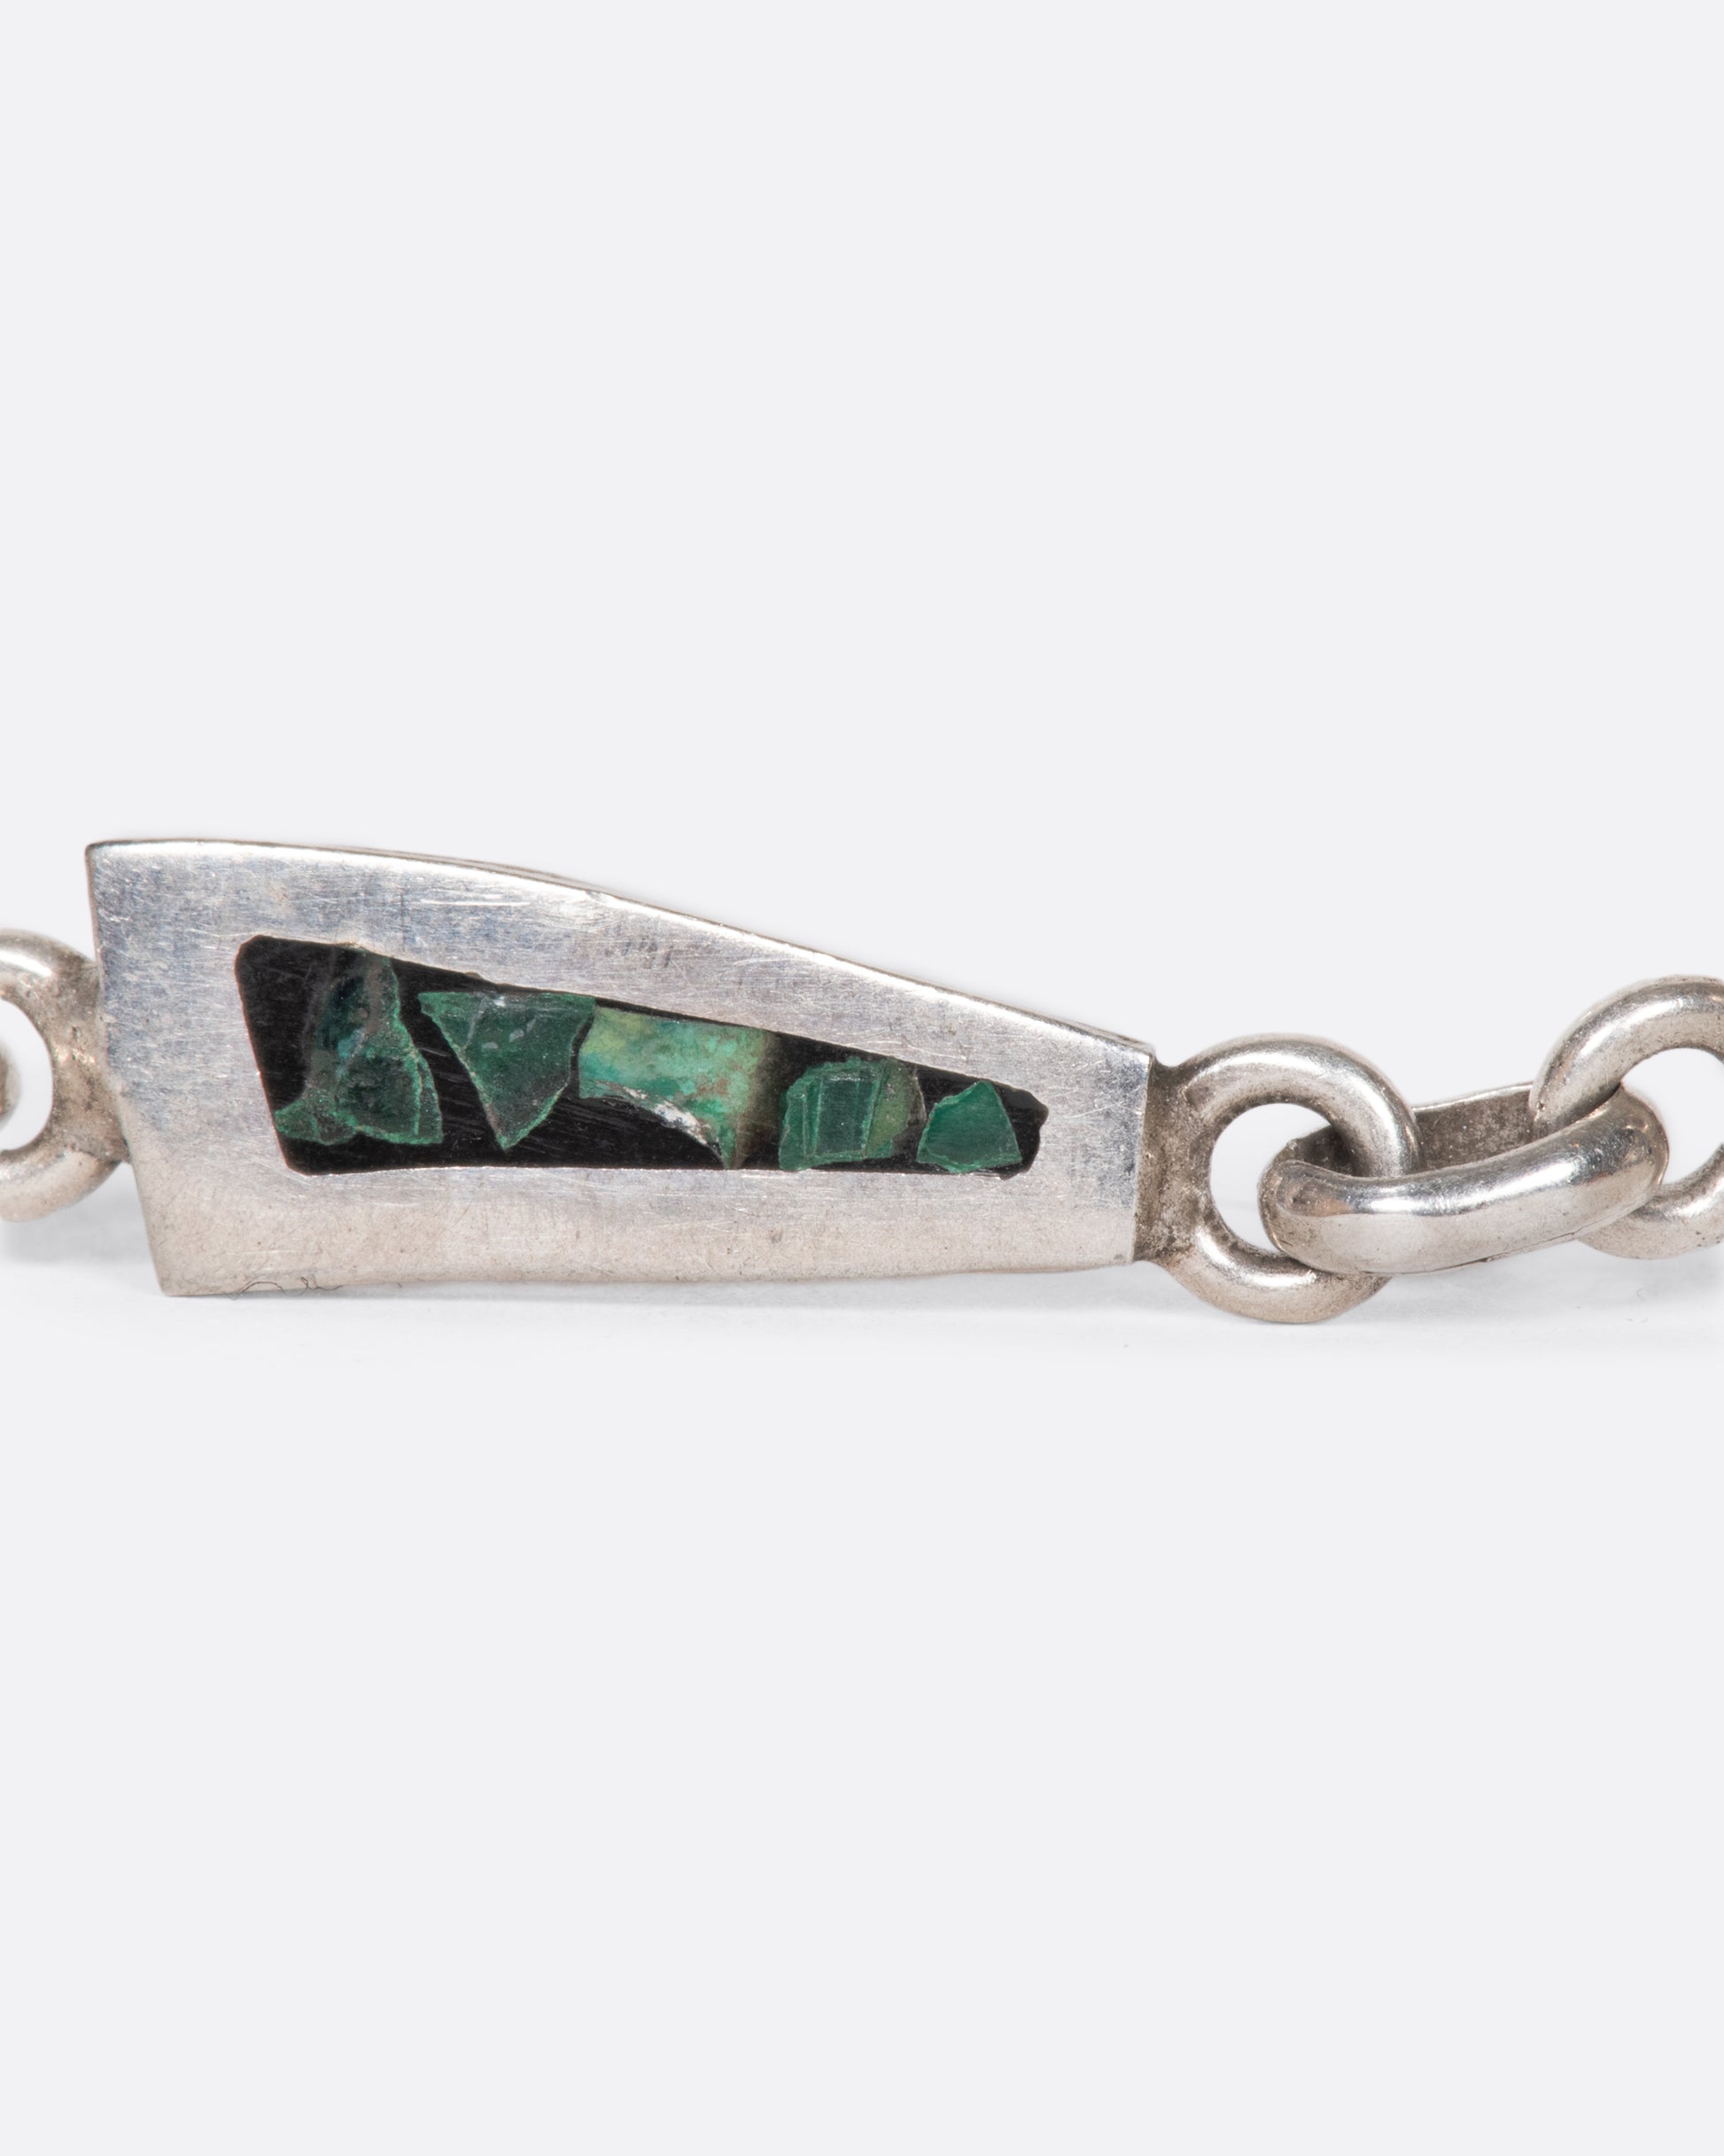 A sterling silver chain bracelet with long, trapezoidal links, lined with malachite inlay, shown close up.